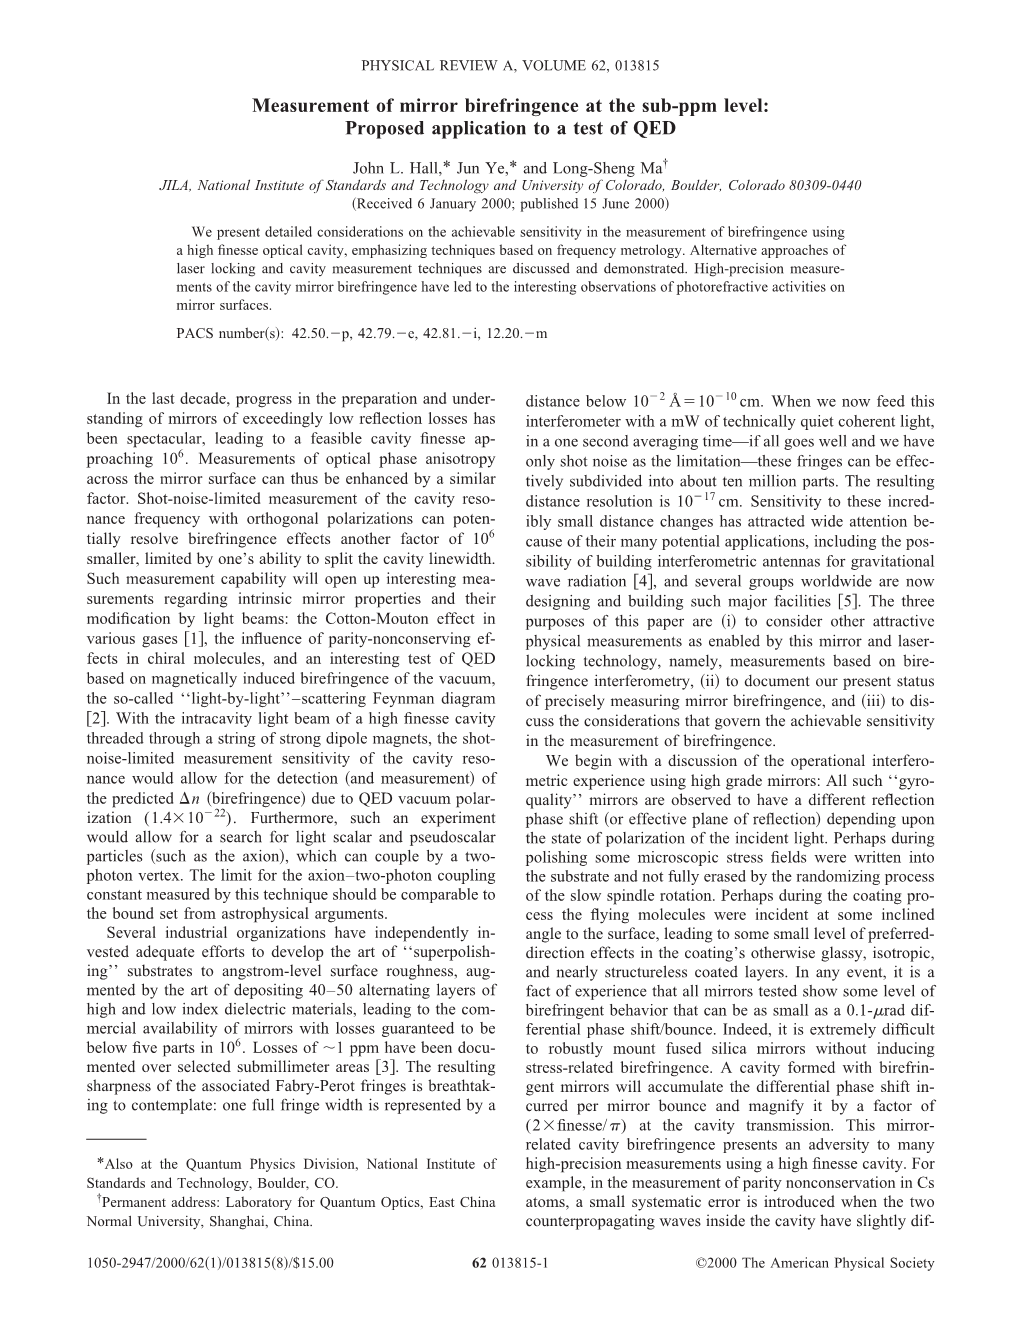 Measurement of Mirror Birefringence at the Sub-Ppm Level: Proposed Application to a Test of QED